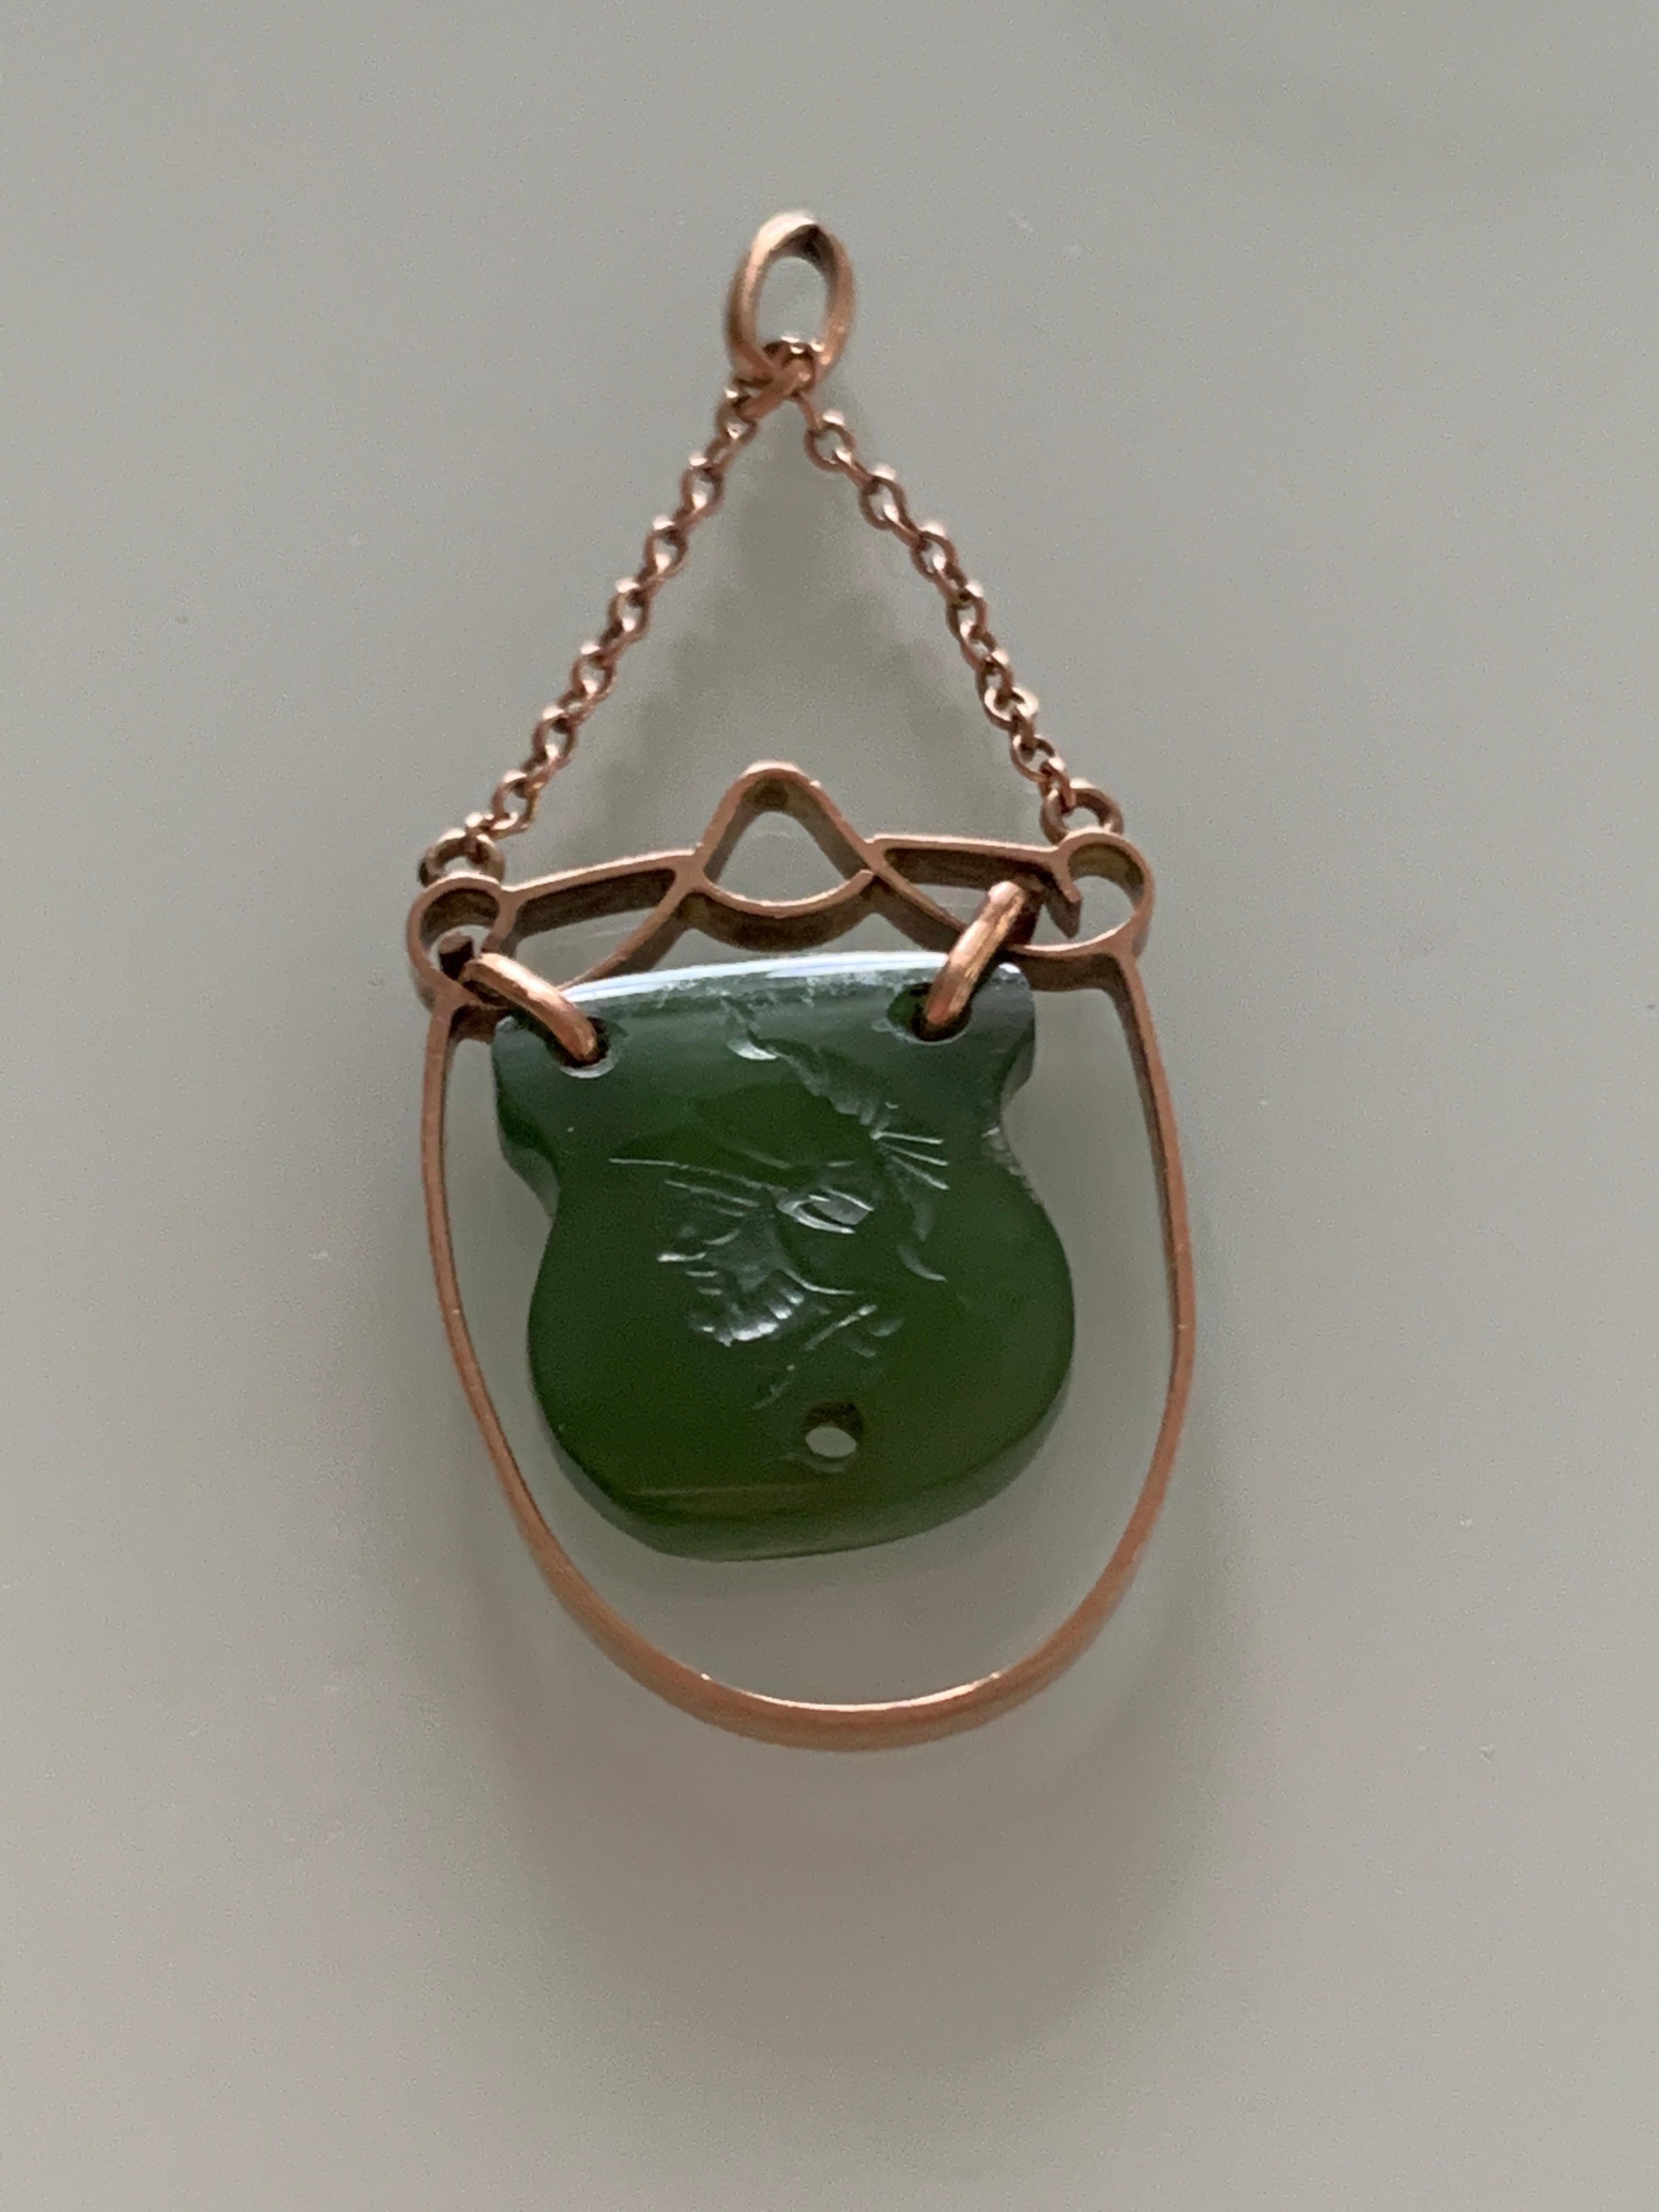 Antique - Victorian Era - Circa 1800s
9ct Rose Gold swing Mounted Centurion etched Shield jade medallion
Condition :
very good - there is a drilled hole in the jade so definitely something 
was strung through this - unsure what it was - so selling